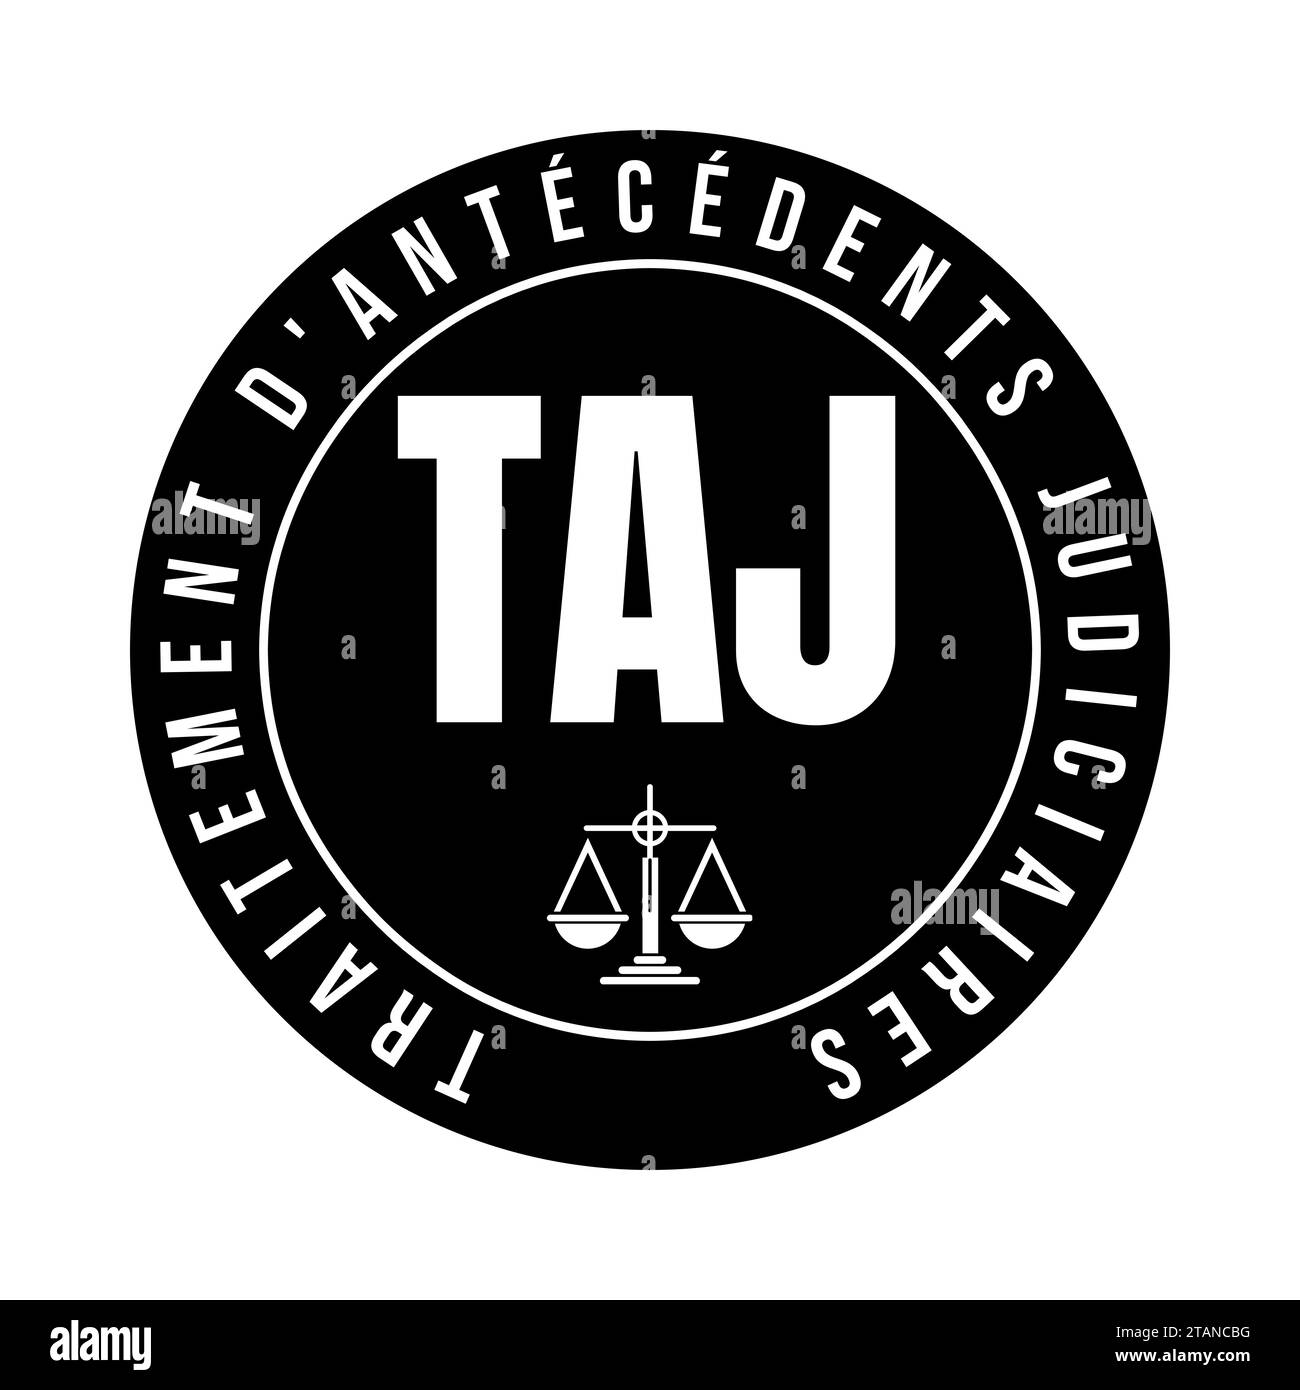 Processing of criminal records symbol icon called TAJ traitement d'antecedents judiciaires in French language Stock Photo